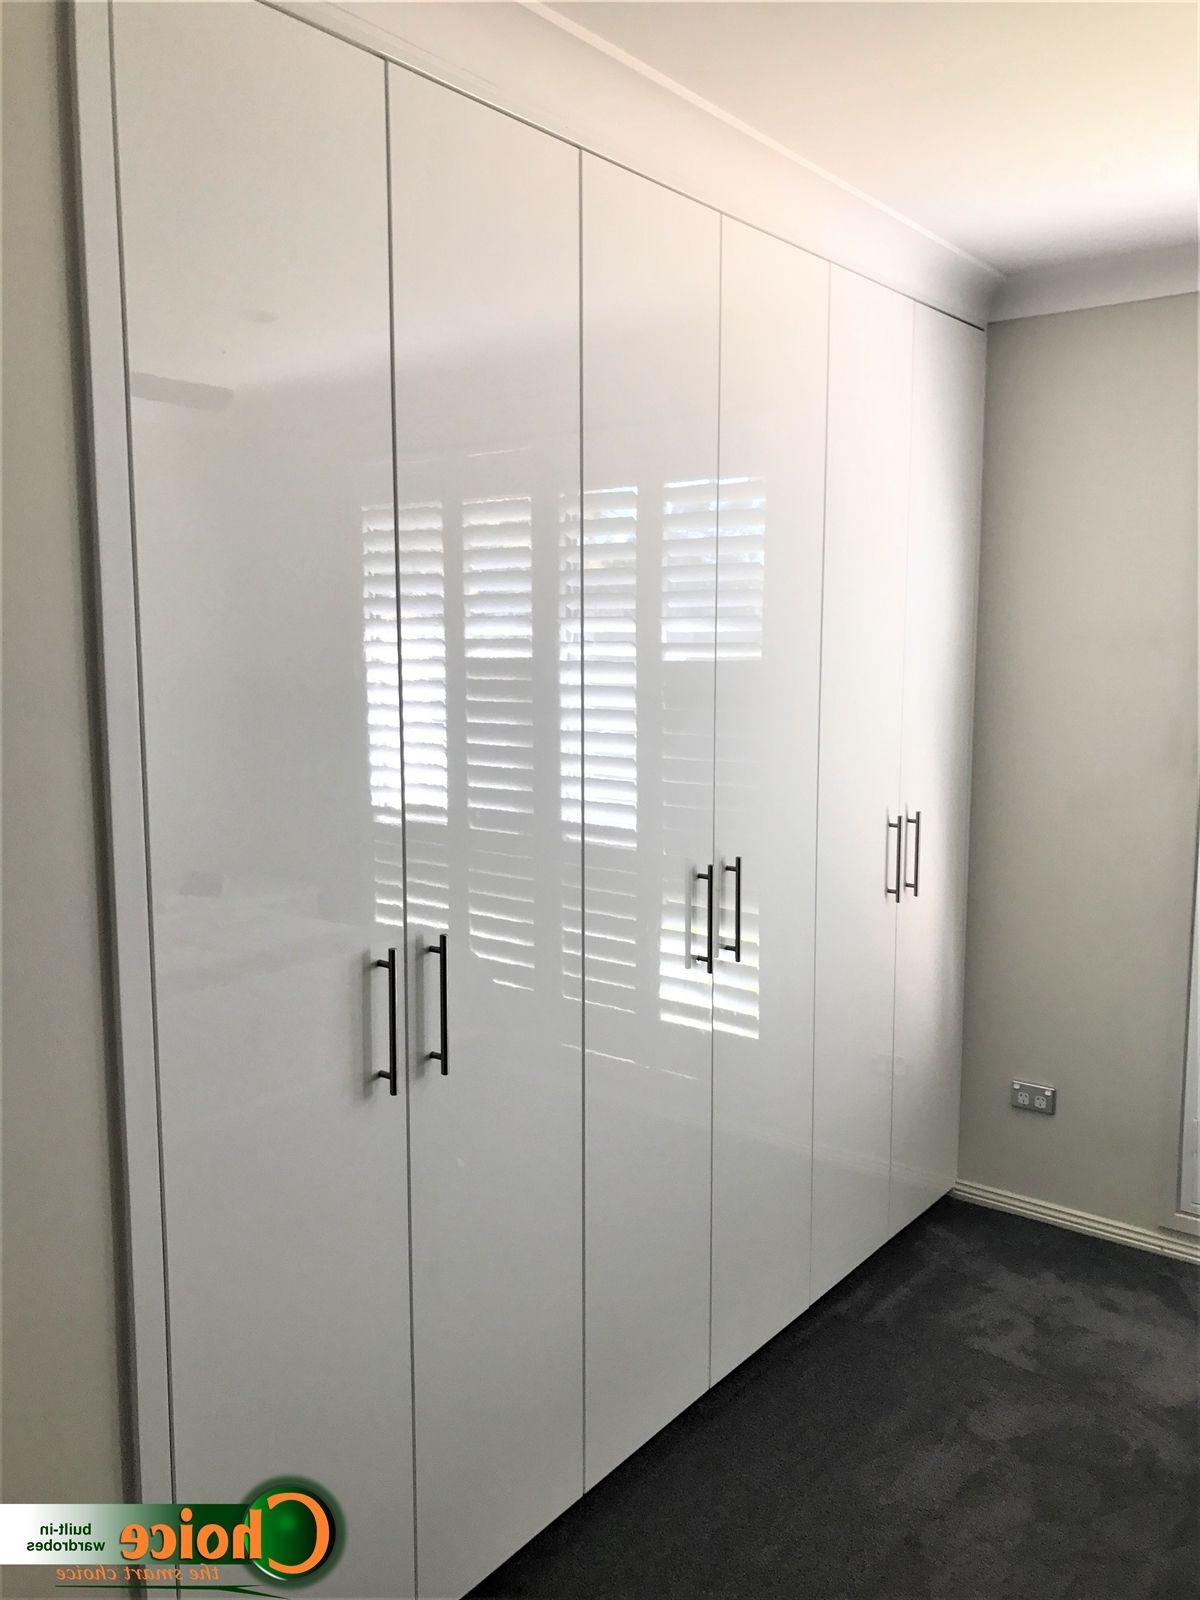 High Gloss White Pollurathane Sliding Doors  Choice Wardrobes | Built In  Wardrobes For Western Sydney  Choice Wardrobes Regarding High Gloss Doors Wardrobes (View 8 of 20)